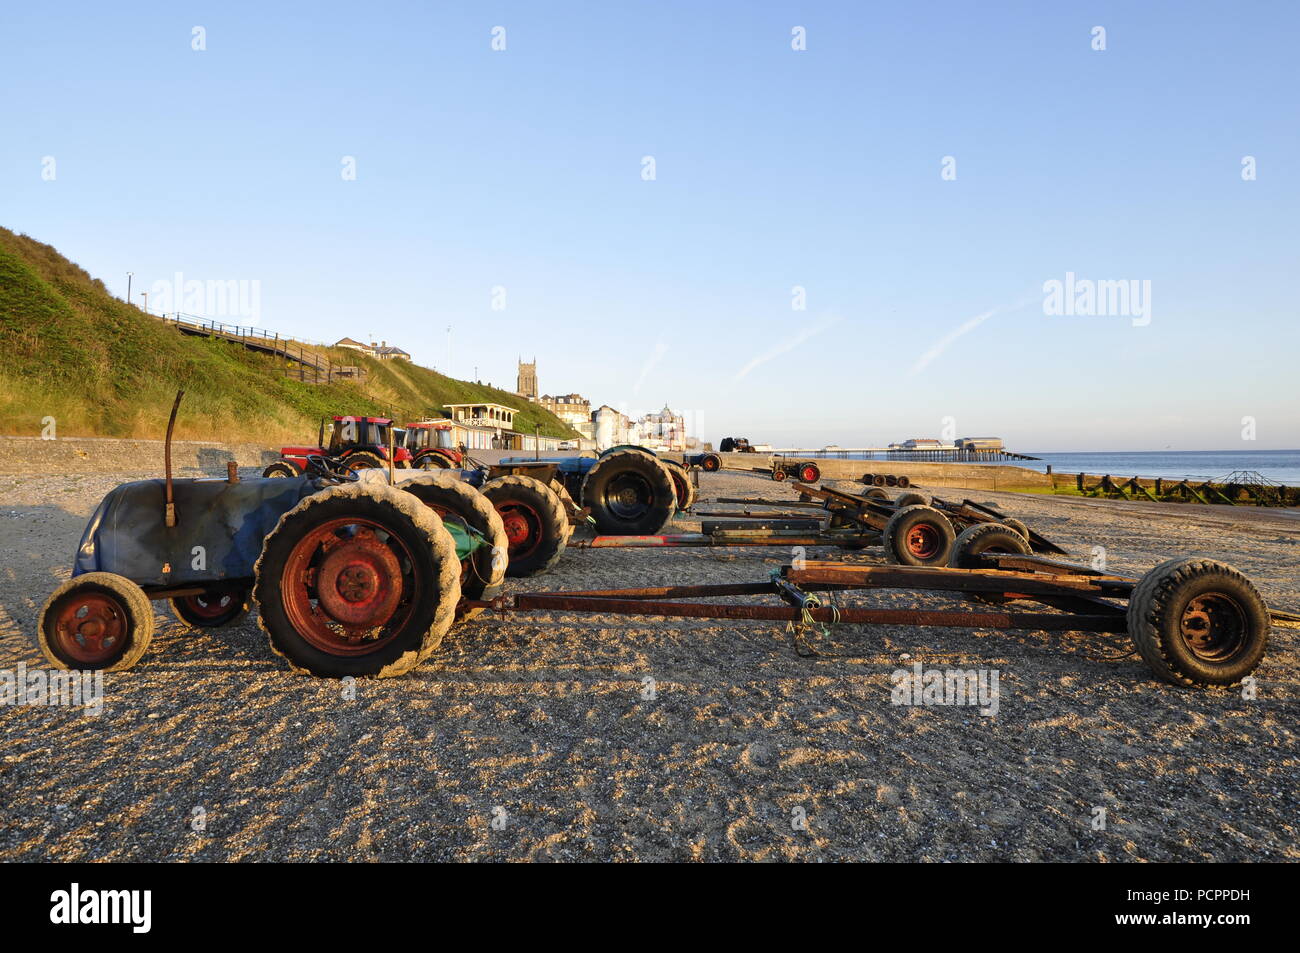 tractors and trailers for Cromer crab boats, Cromer, Norfolk UK Stock Photo